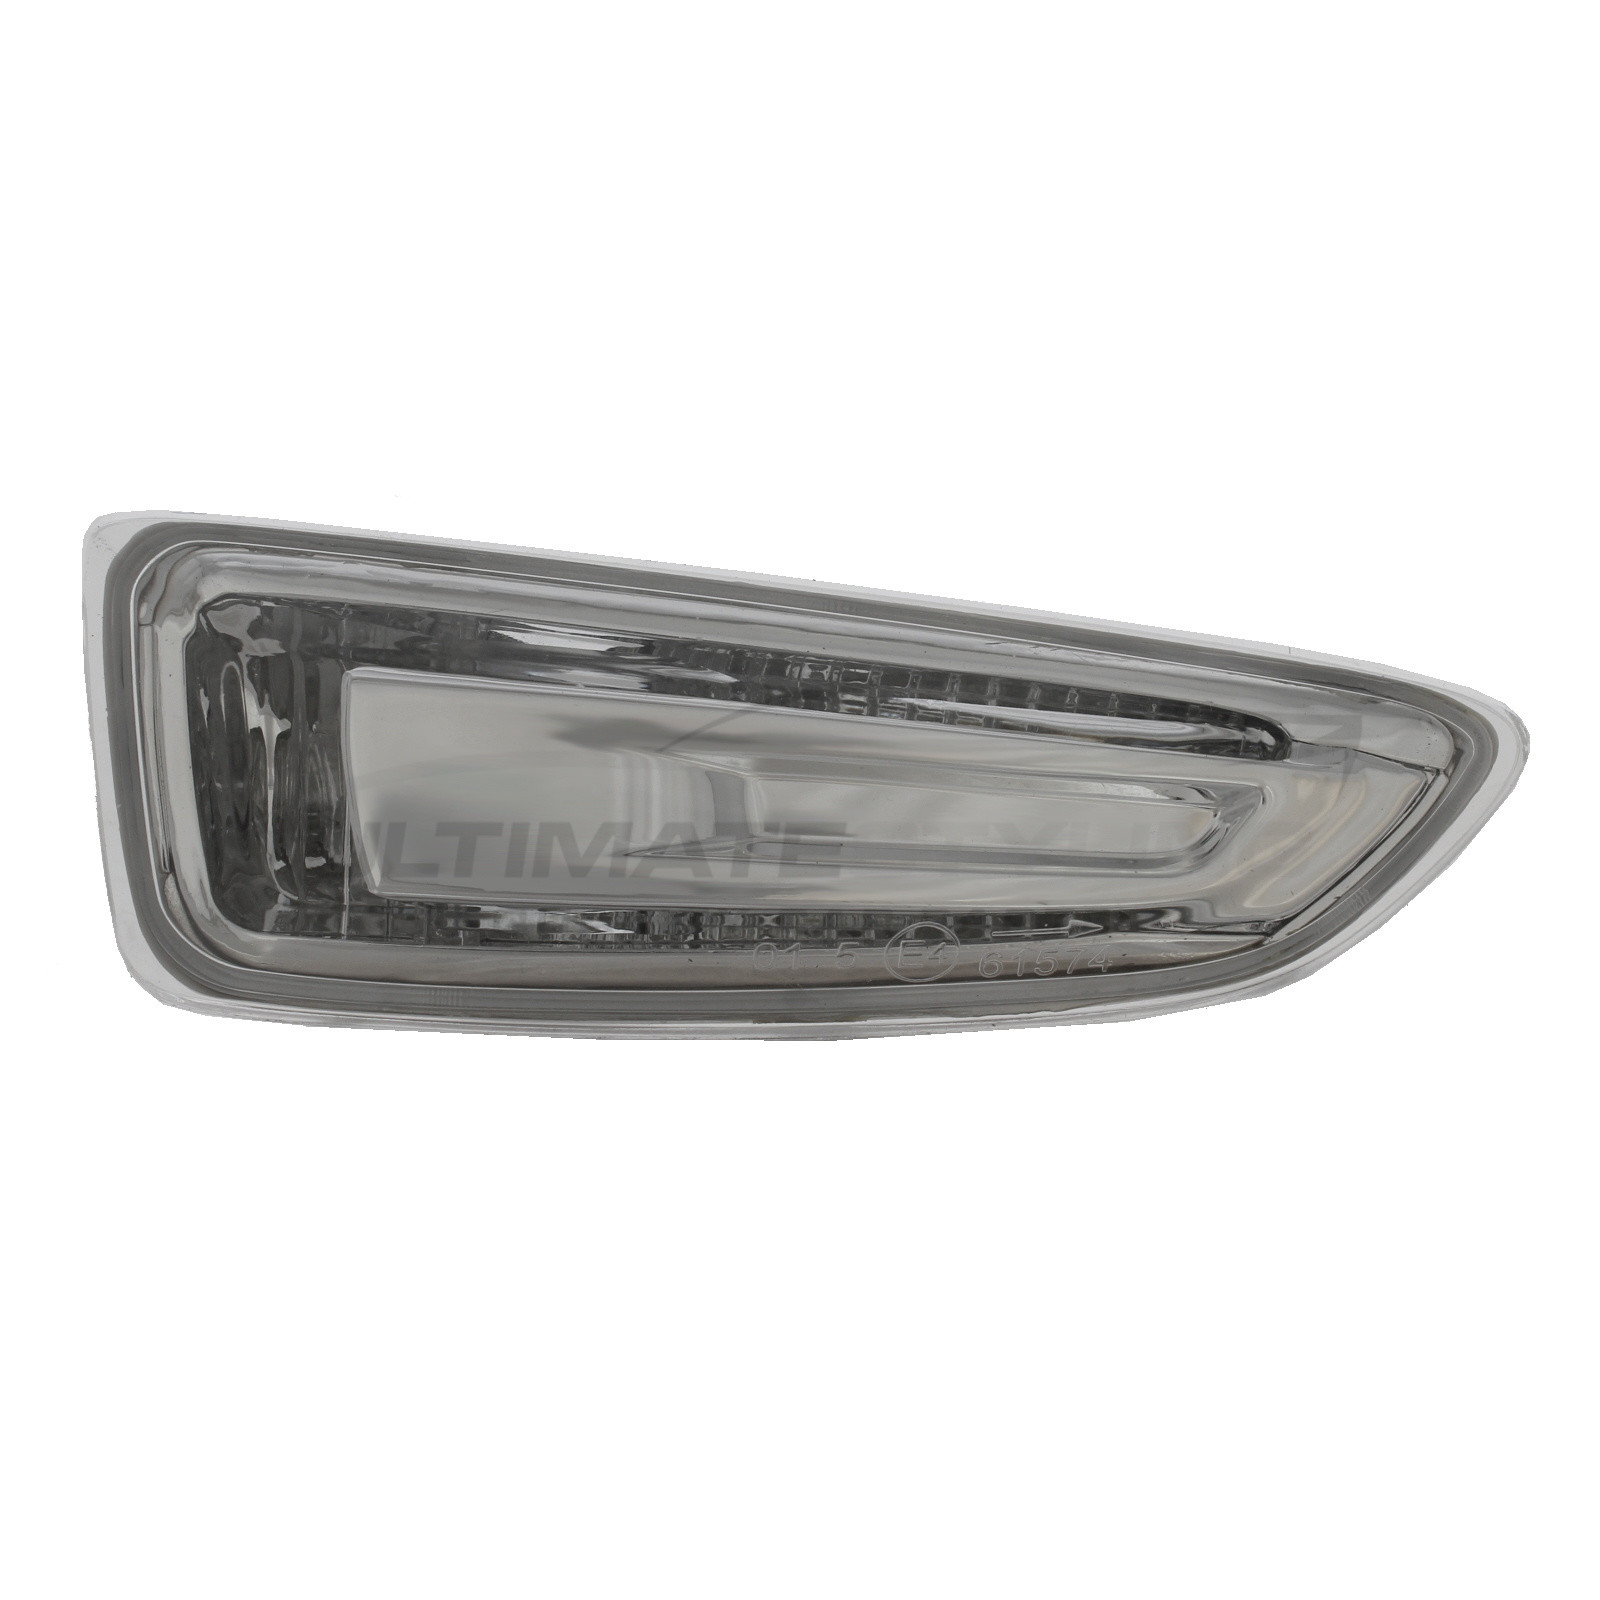 Vauxhall Astra / GTC Side Repeater - Drivers Side (RH) - Clear lens - Non-LED